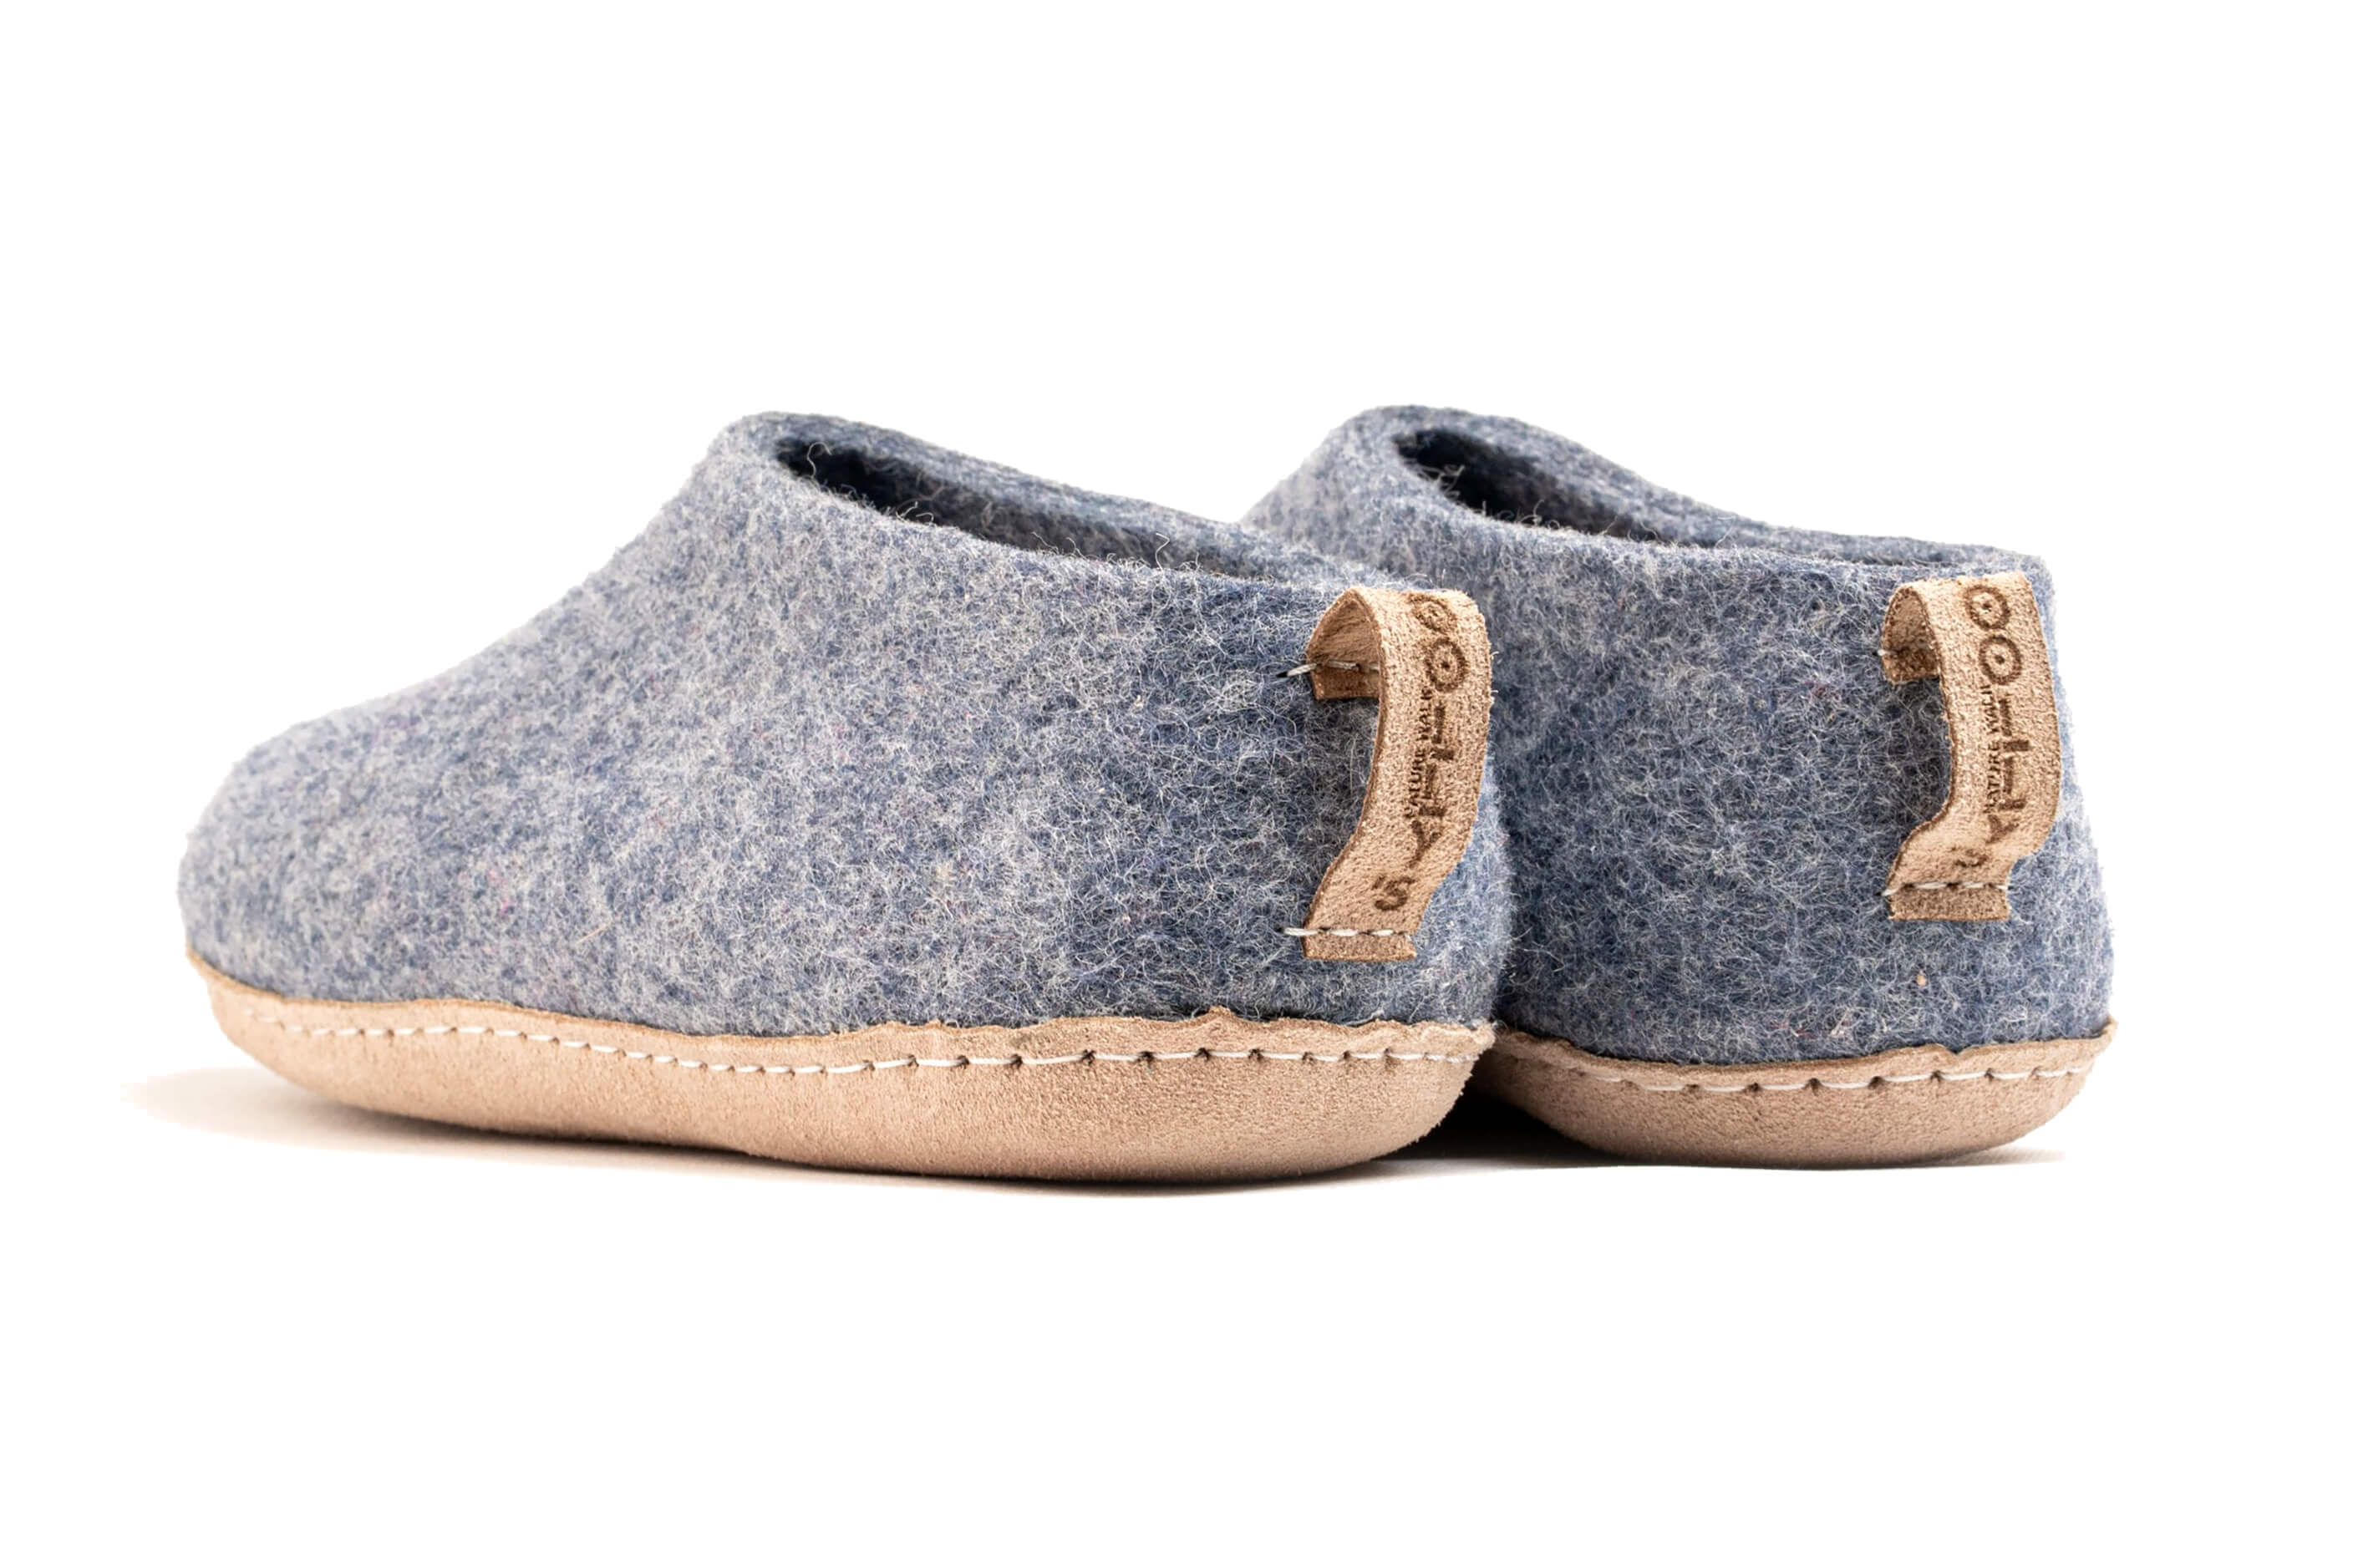 Indoor Shoes With Leather Sole - Denim